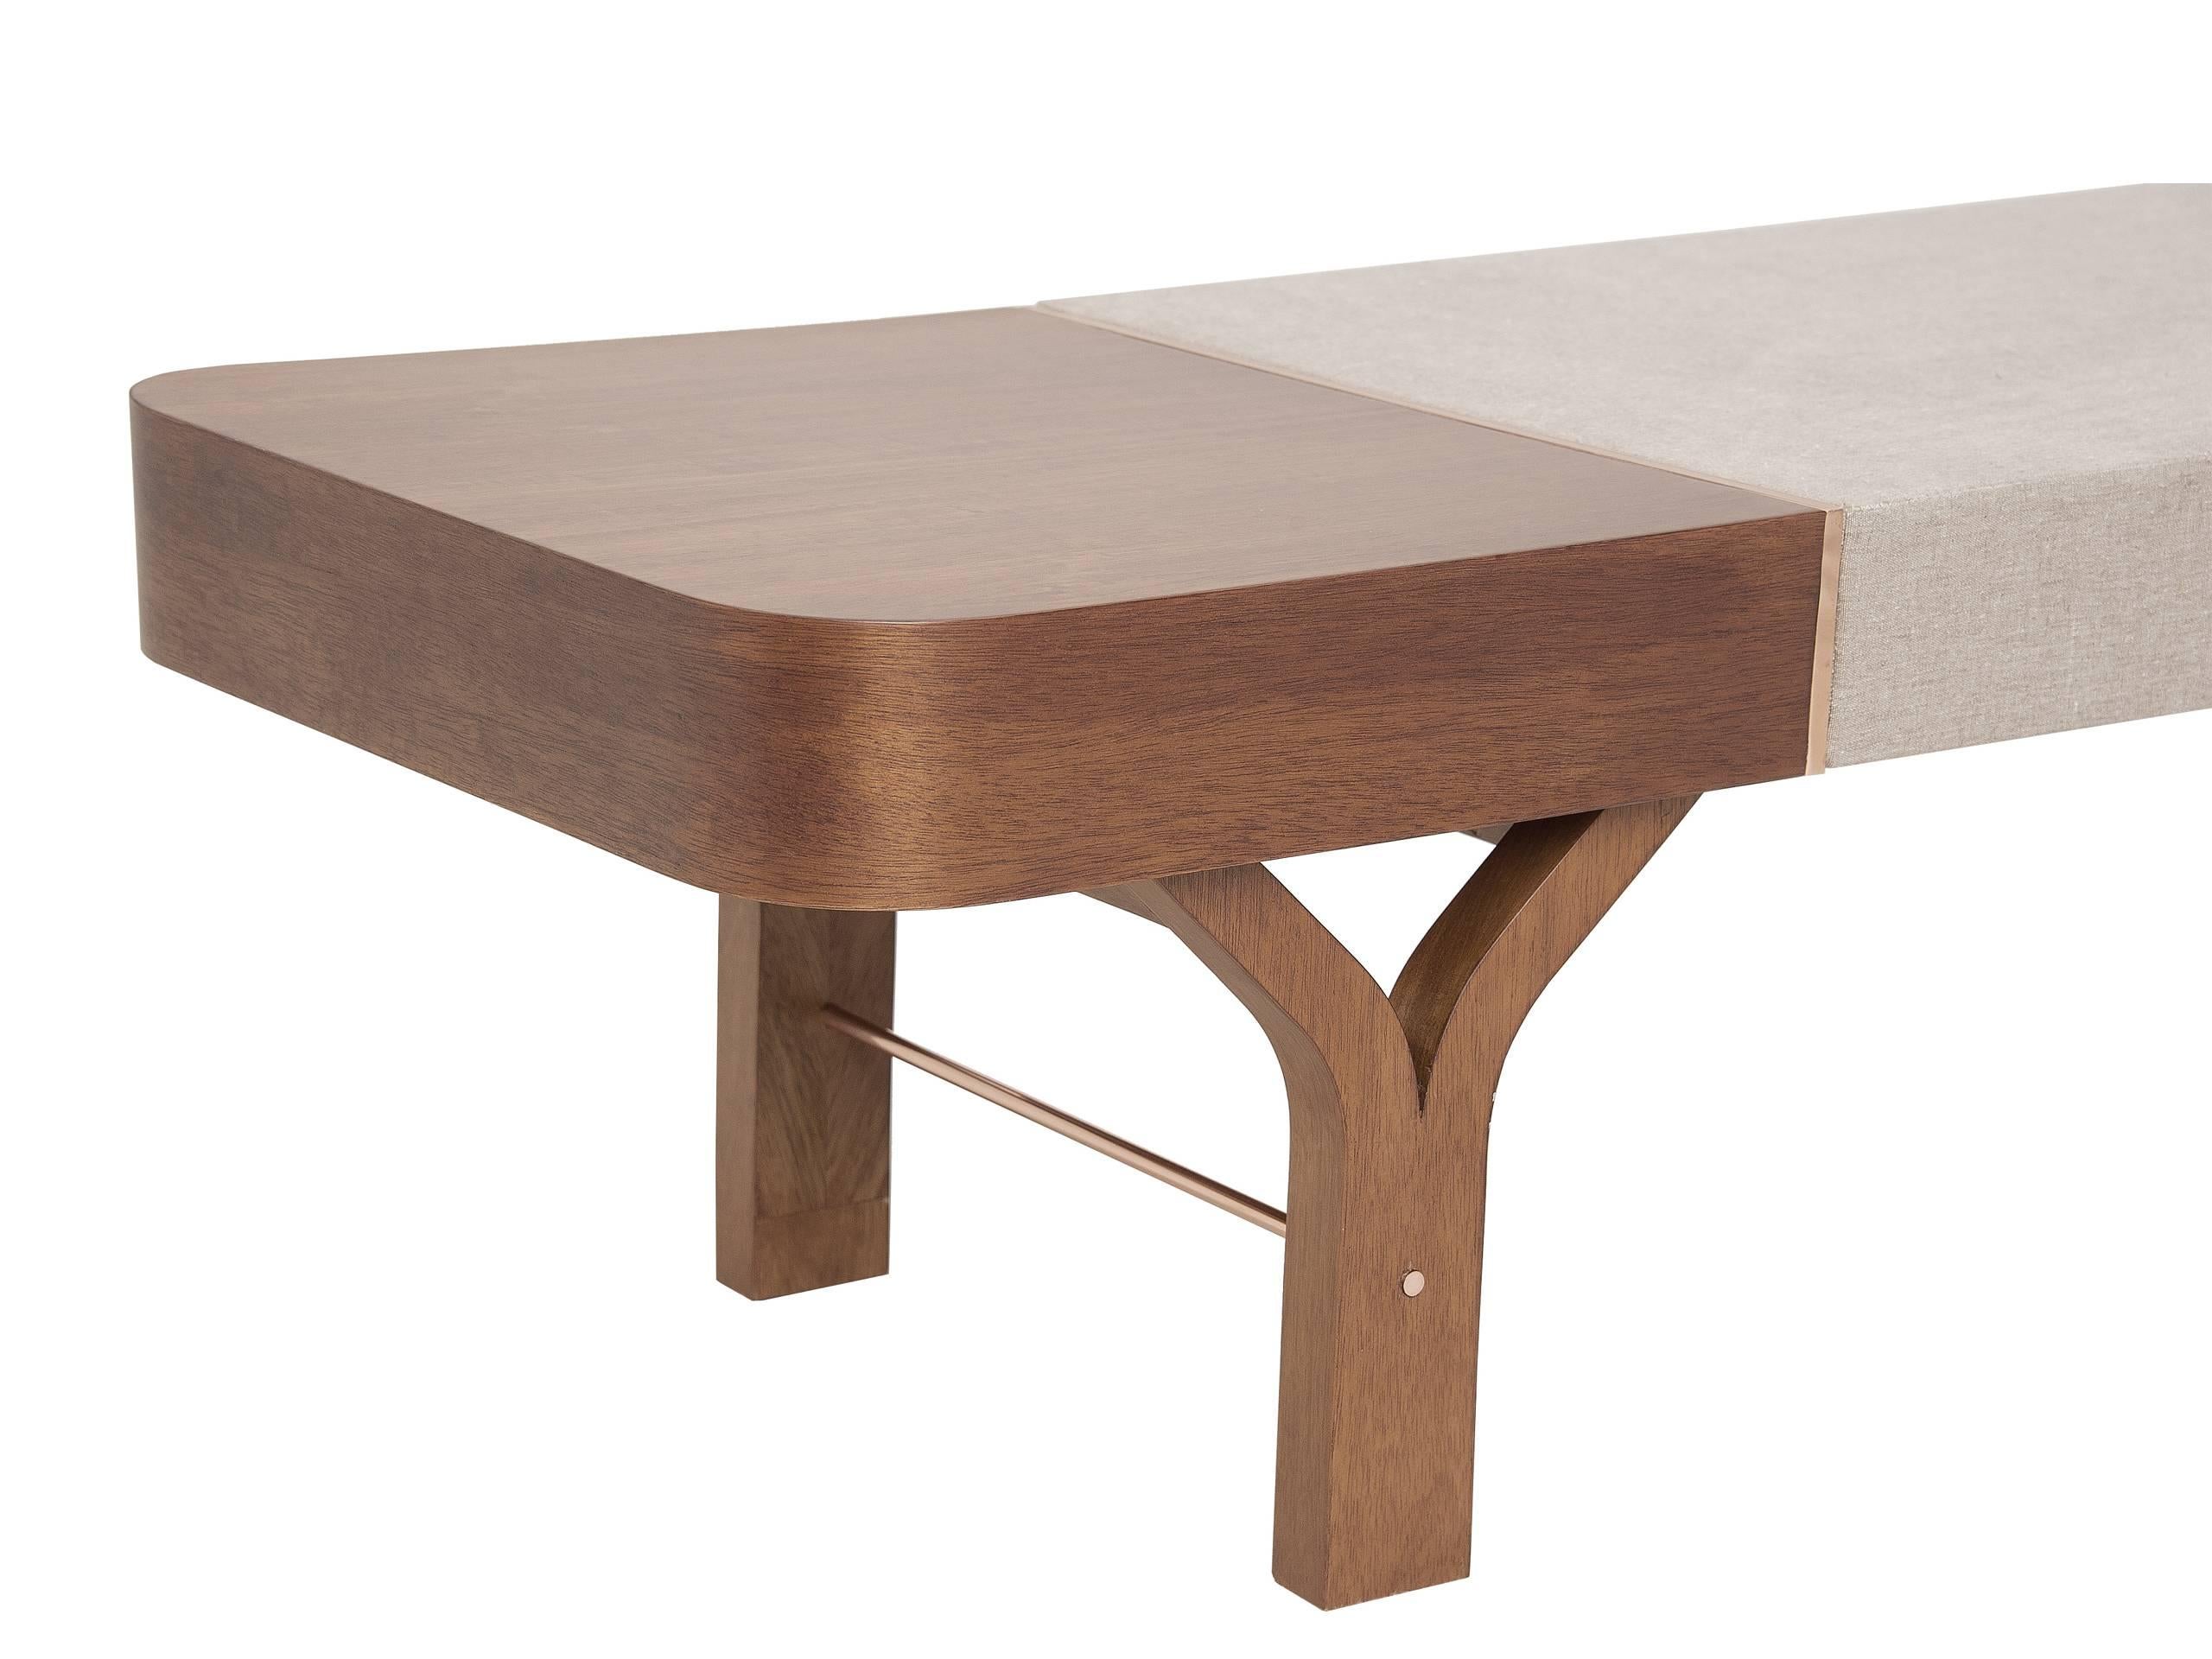 The bench Due (two in Italian) has a double function: Table and seat in one single piece.